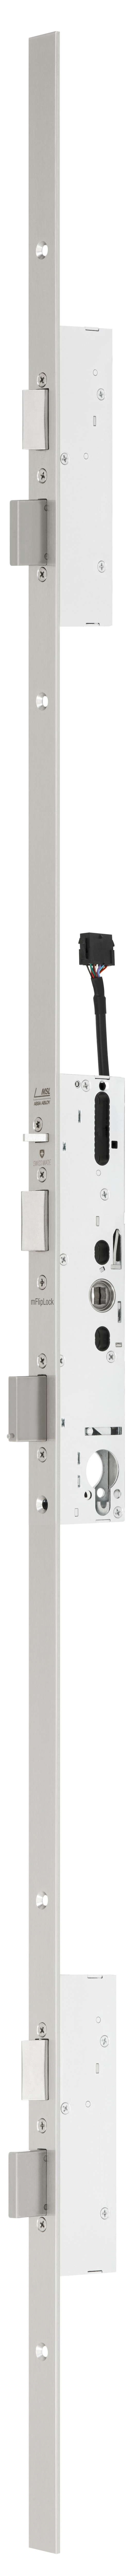 Panic security multi-point locking system with contacts and panic function B, outwards opening 24576PBa-SV-ZF